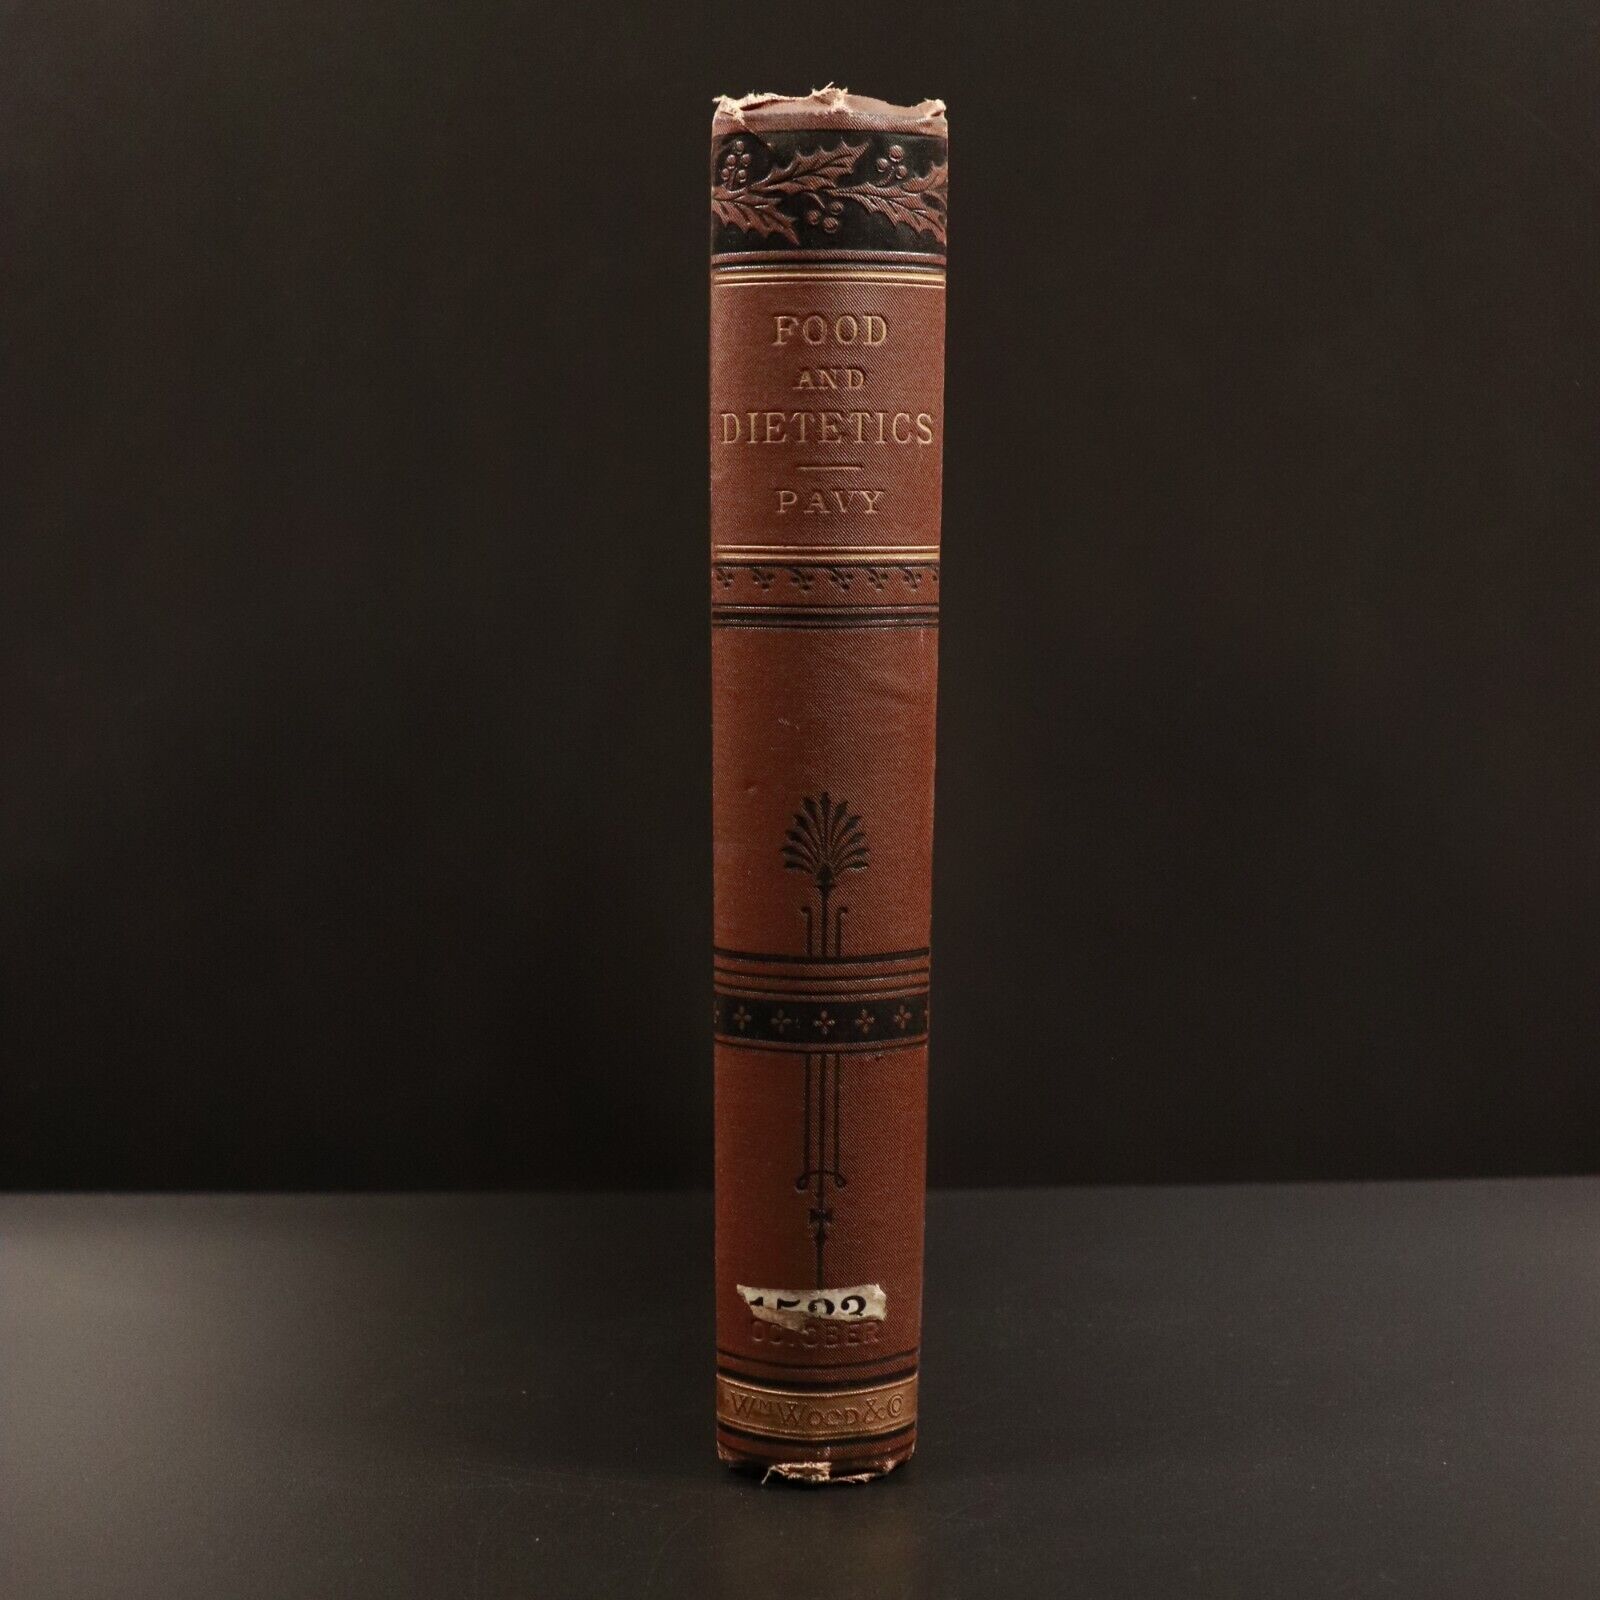 1881 A Treatise On Food & Dietetics by F.W. Pavy Antique Medical Health Book